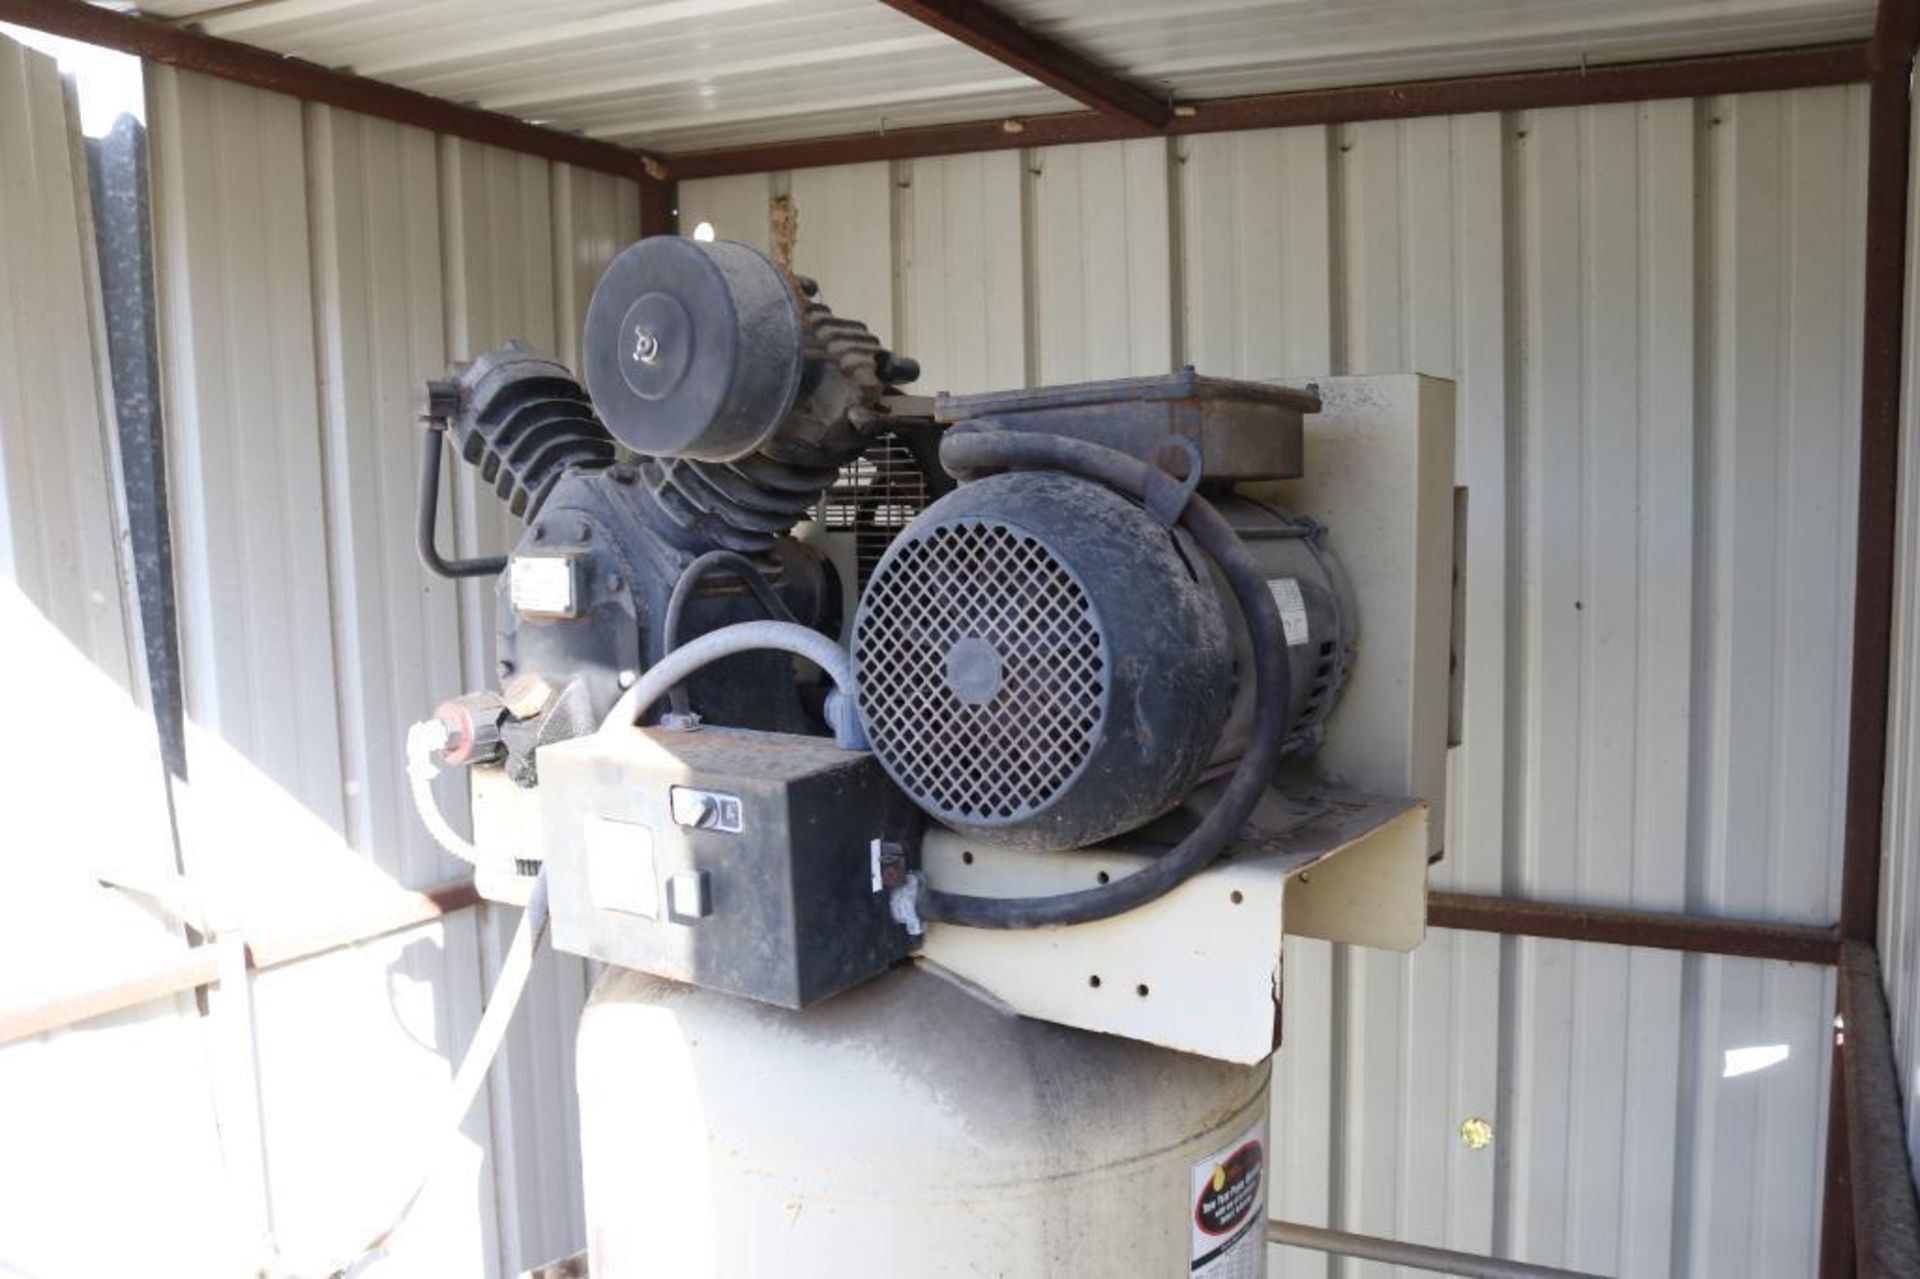 Ingersoll Rand Model 2475.5-P Two Stage Cast Iron Air Compressor Serial Number: CBV554476 230V 60Hz - Image 8 of 9